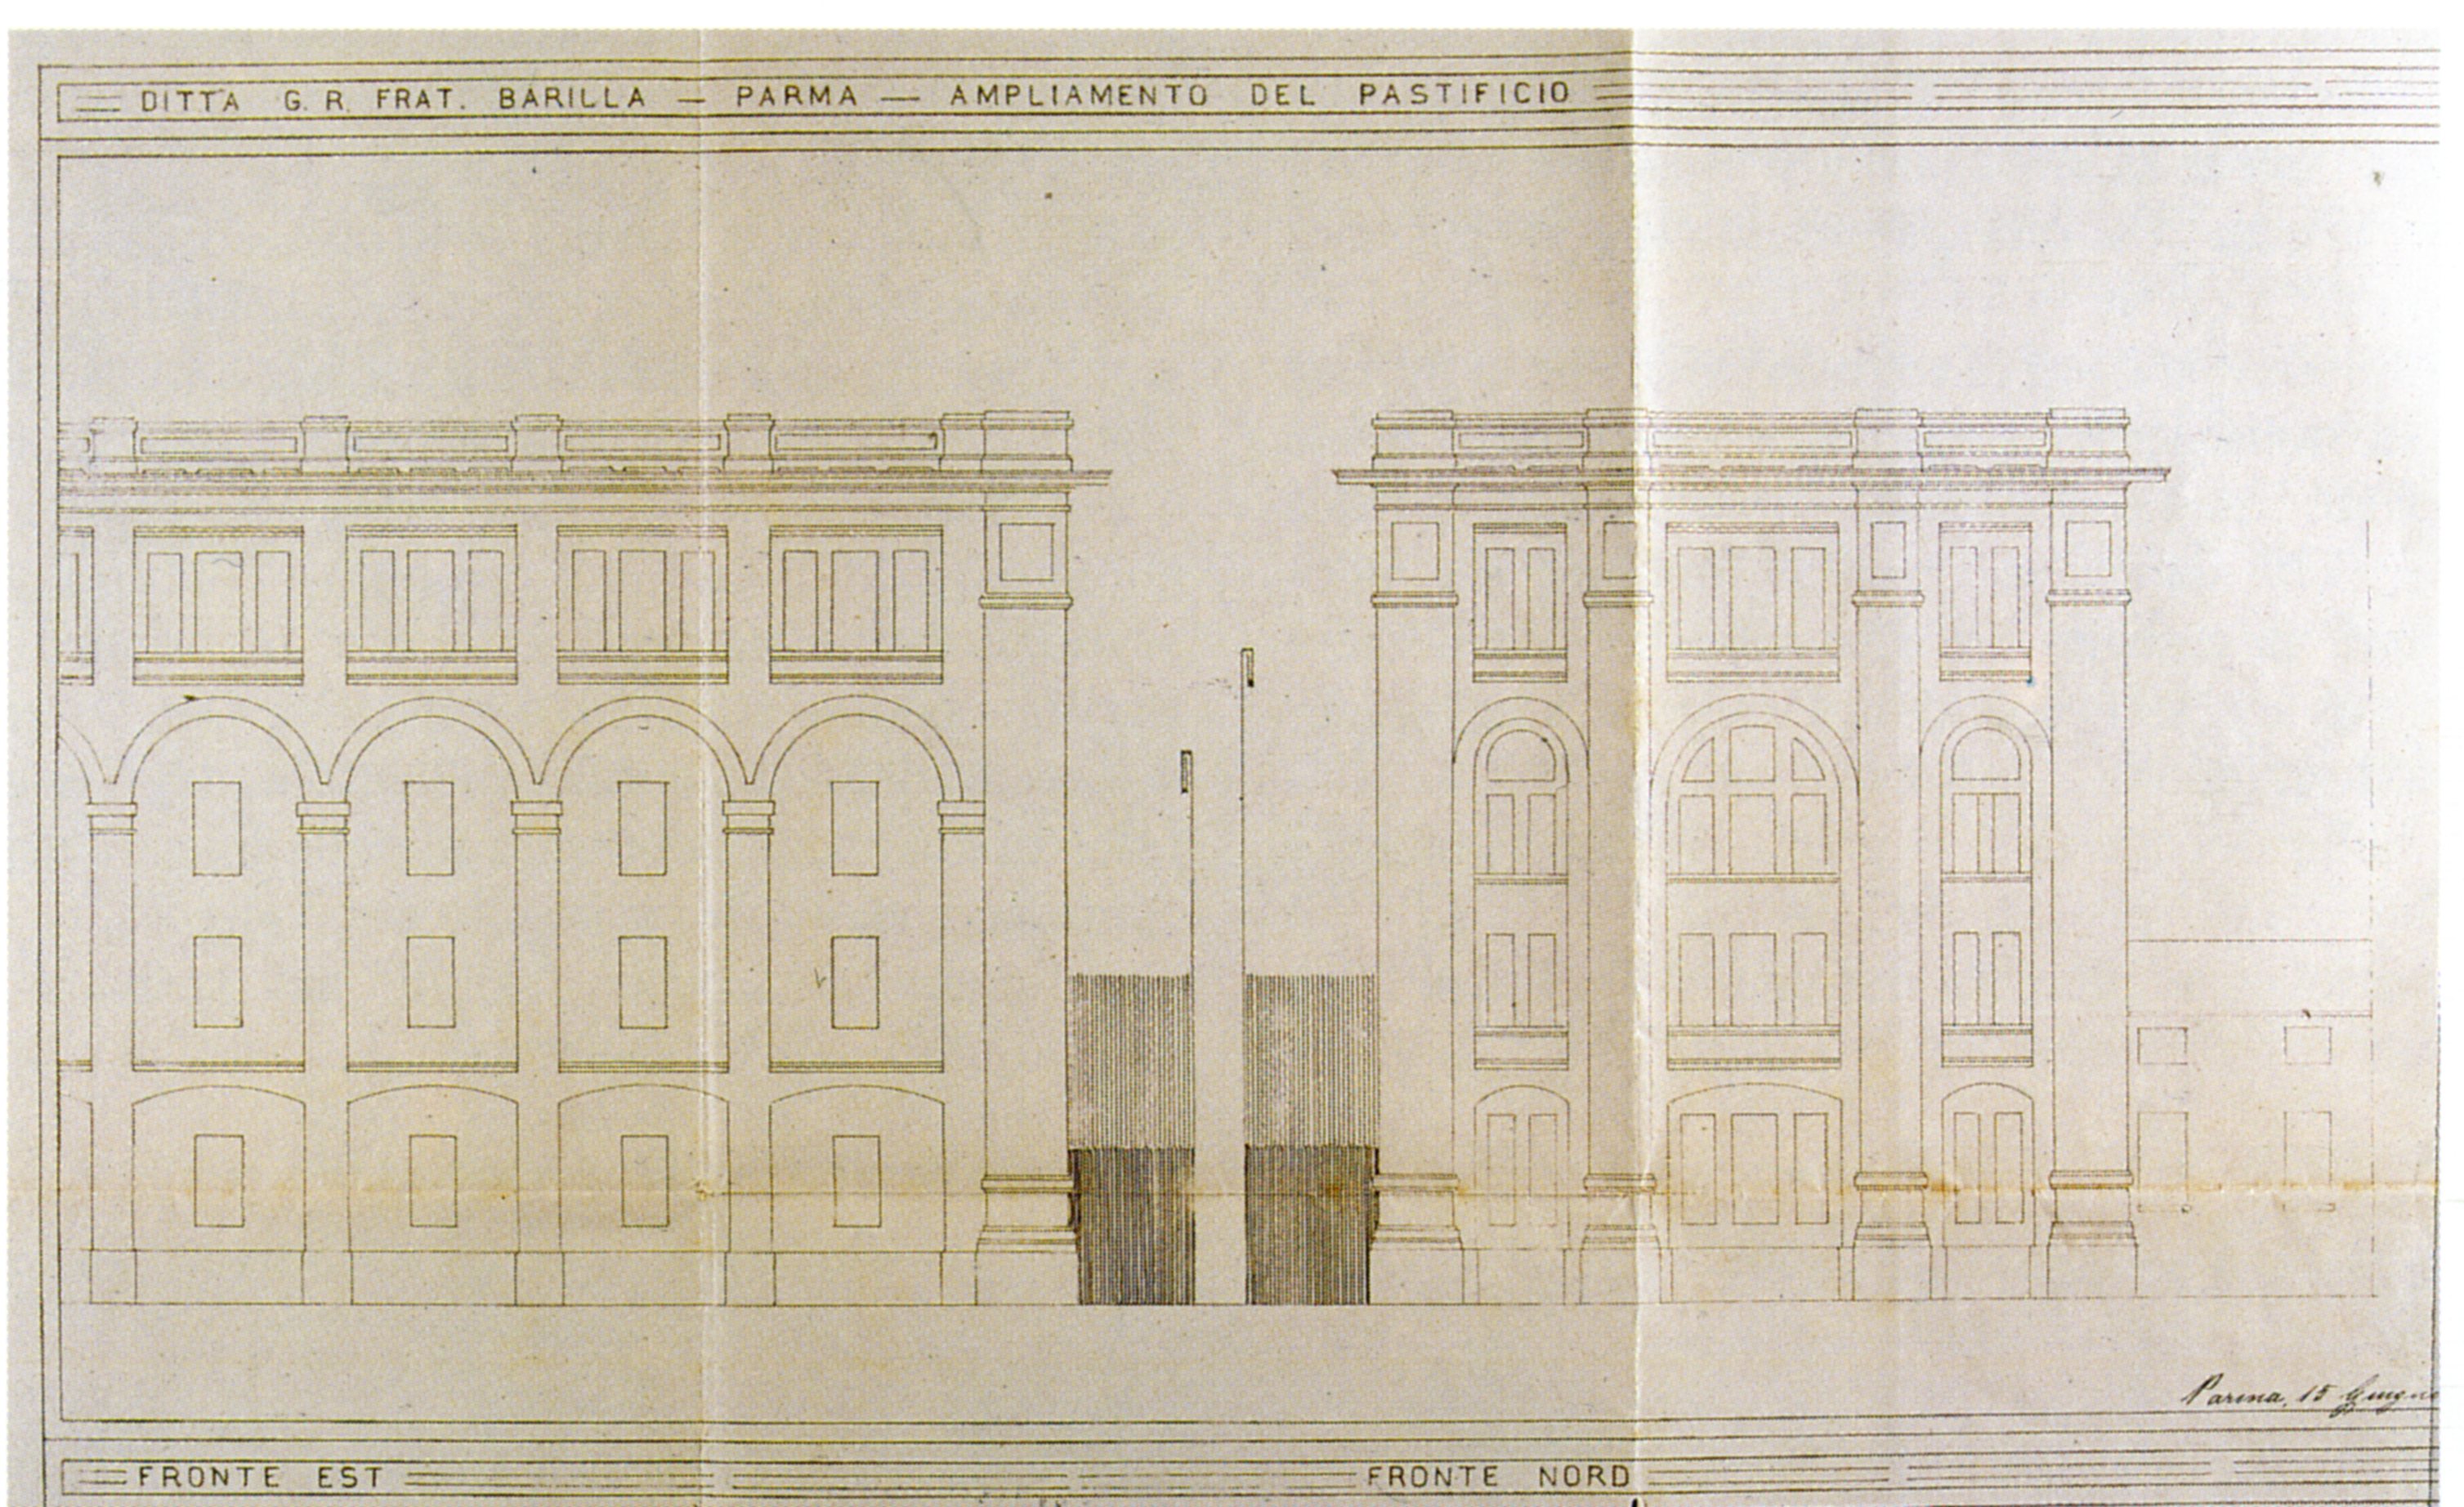 Camillo Uccelli, Extension of the Pasta Factory, 1922: east and north perspective designs [ASCPR, building licenses, 1922/172].